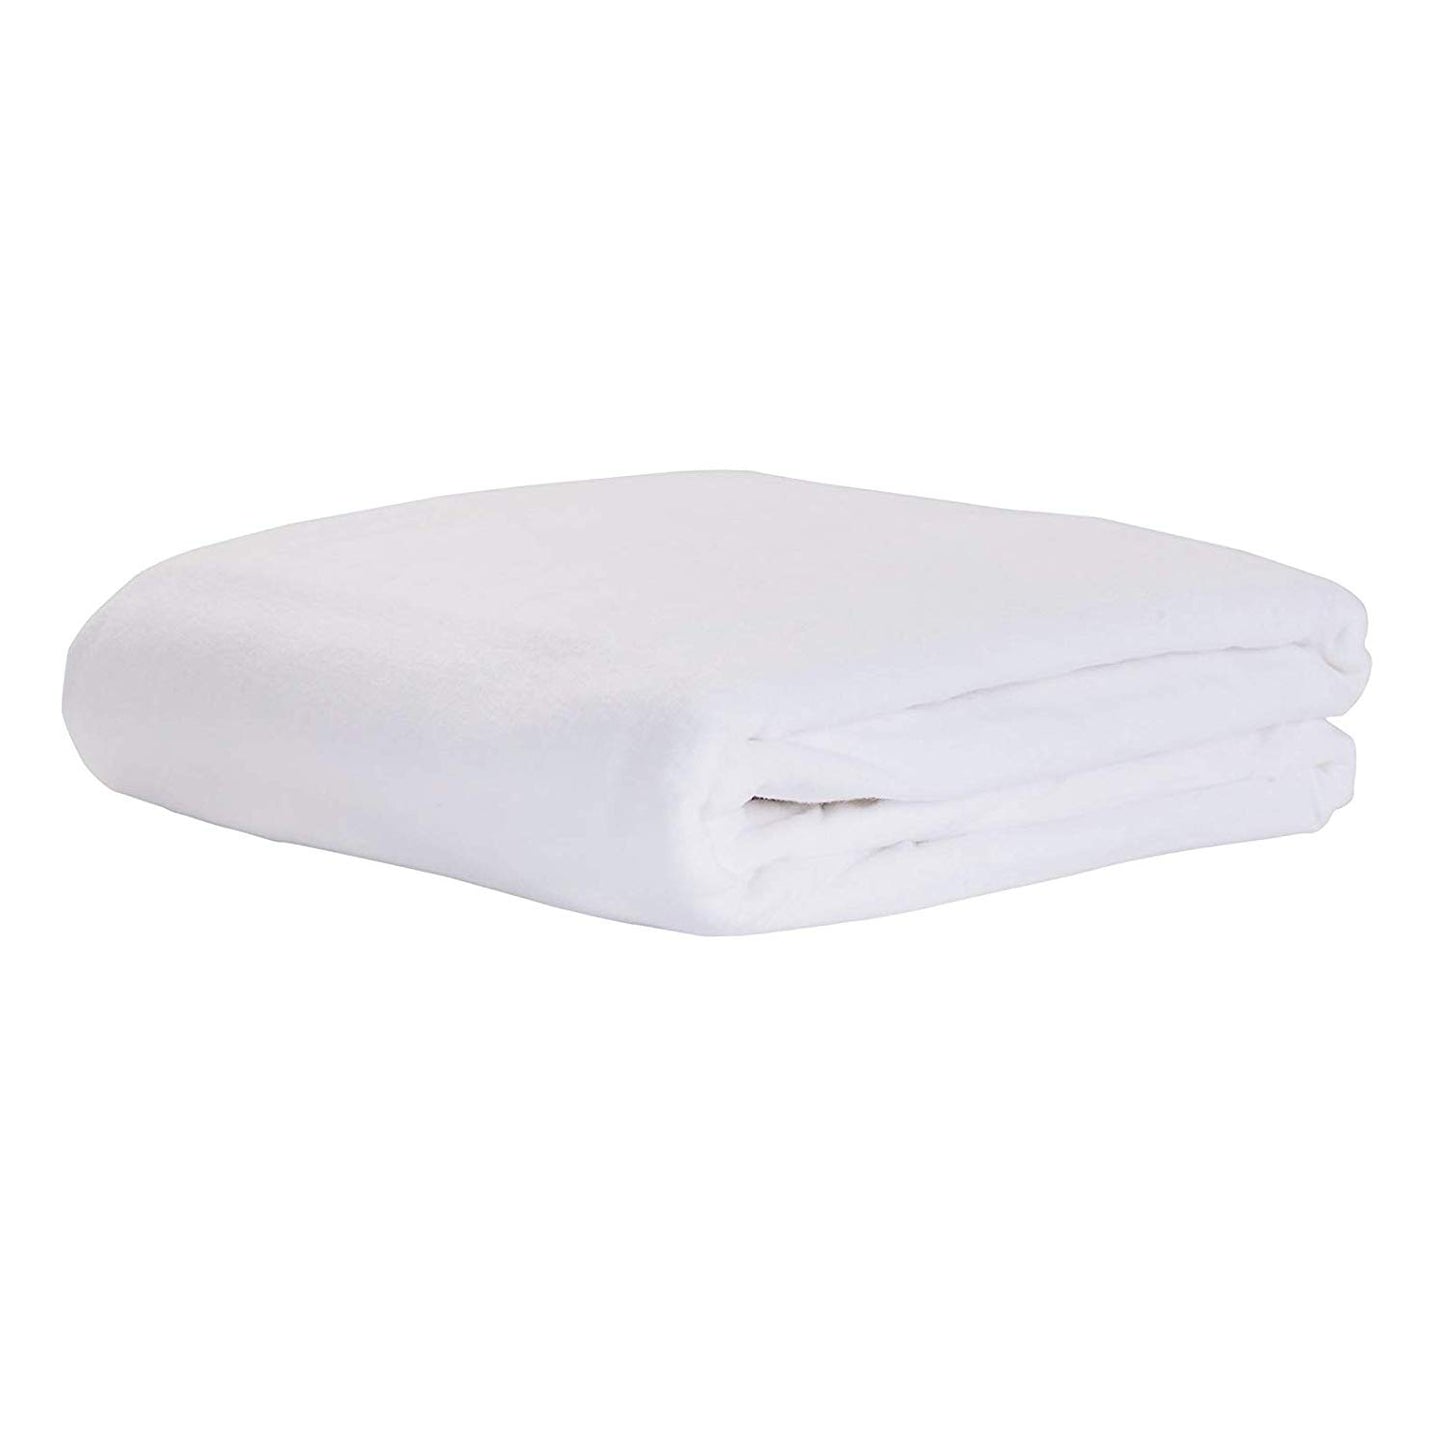 Flannel Flat Massage Table Sheets 57" x 81" (5 Pack)